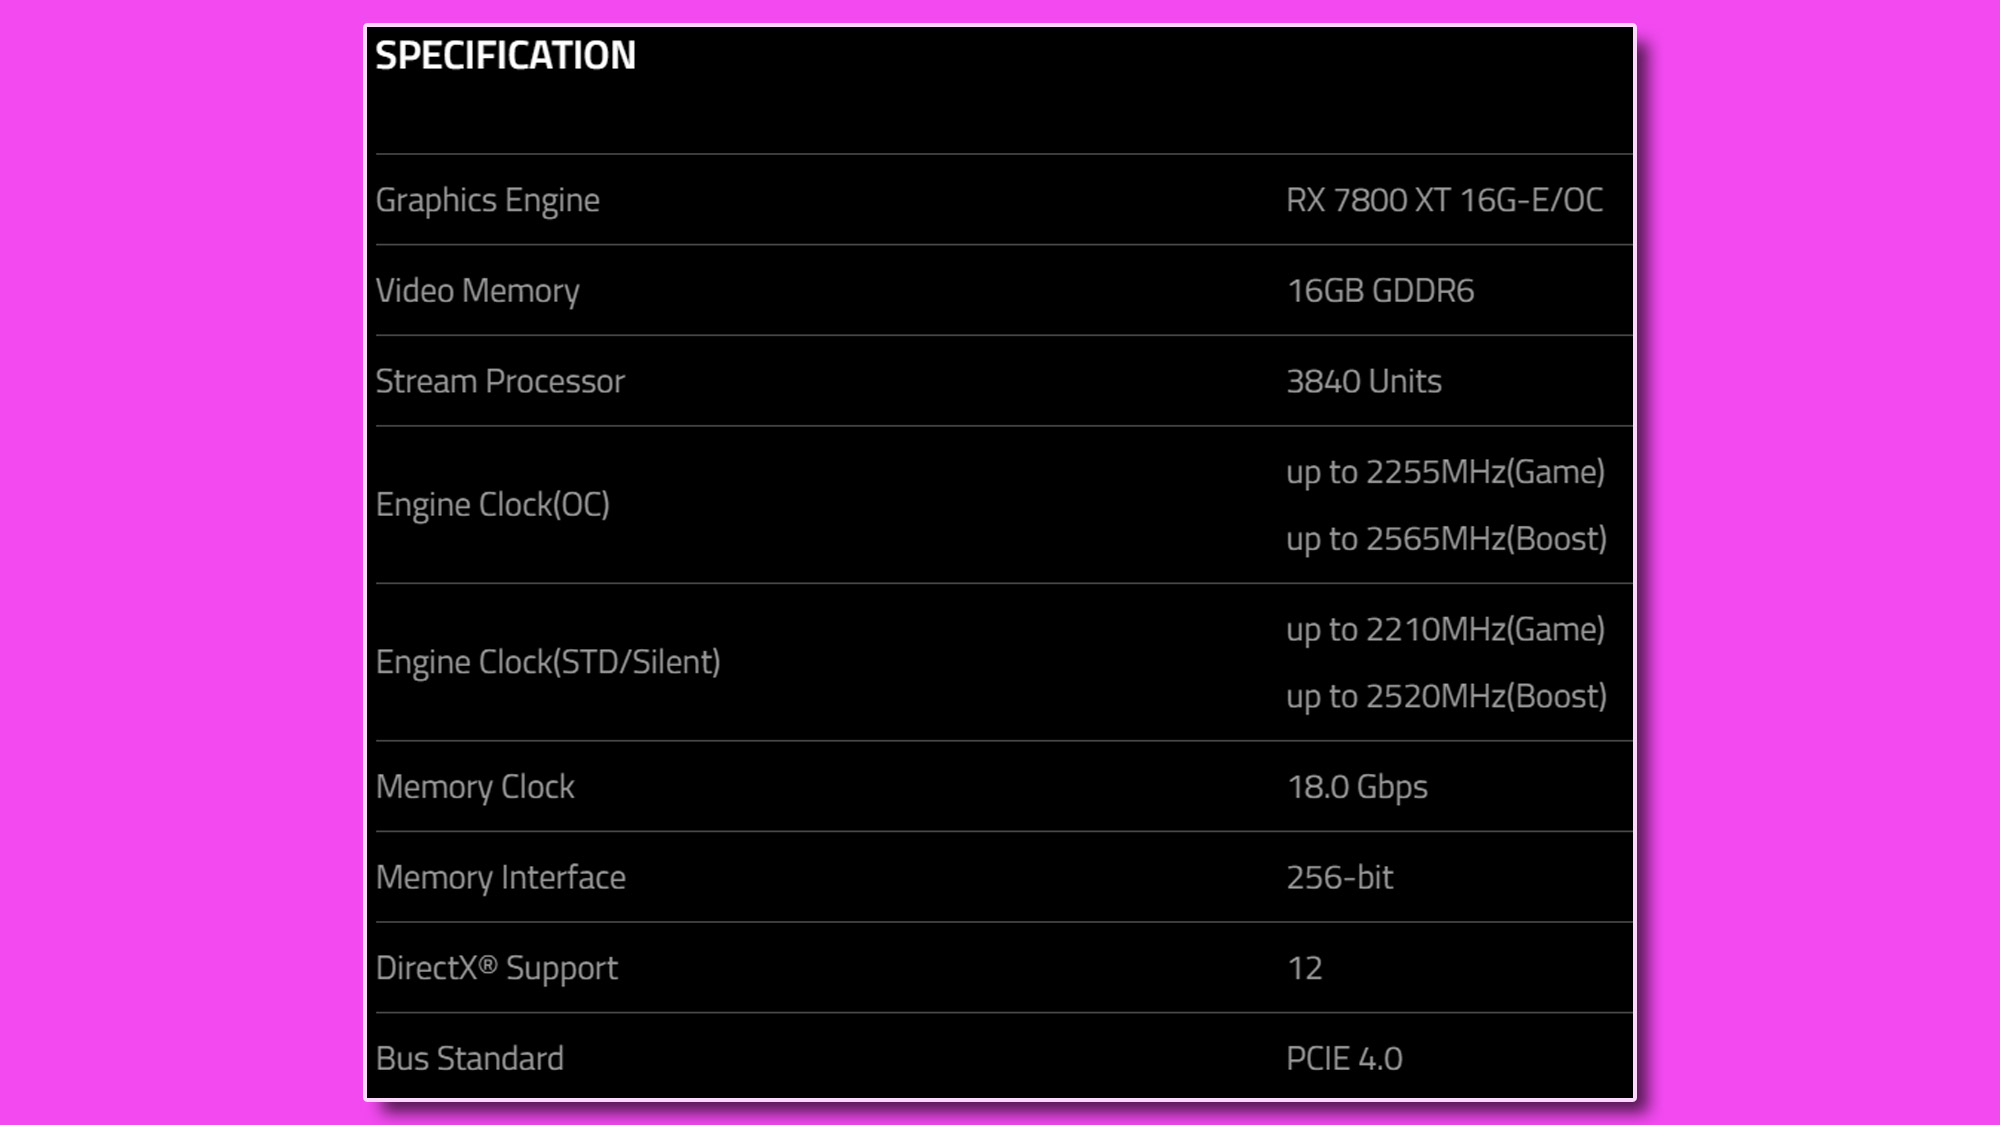 The product page specs listing for the AMD Radeon RX 7800 XT